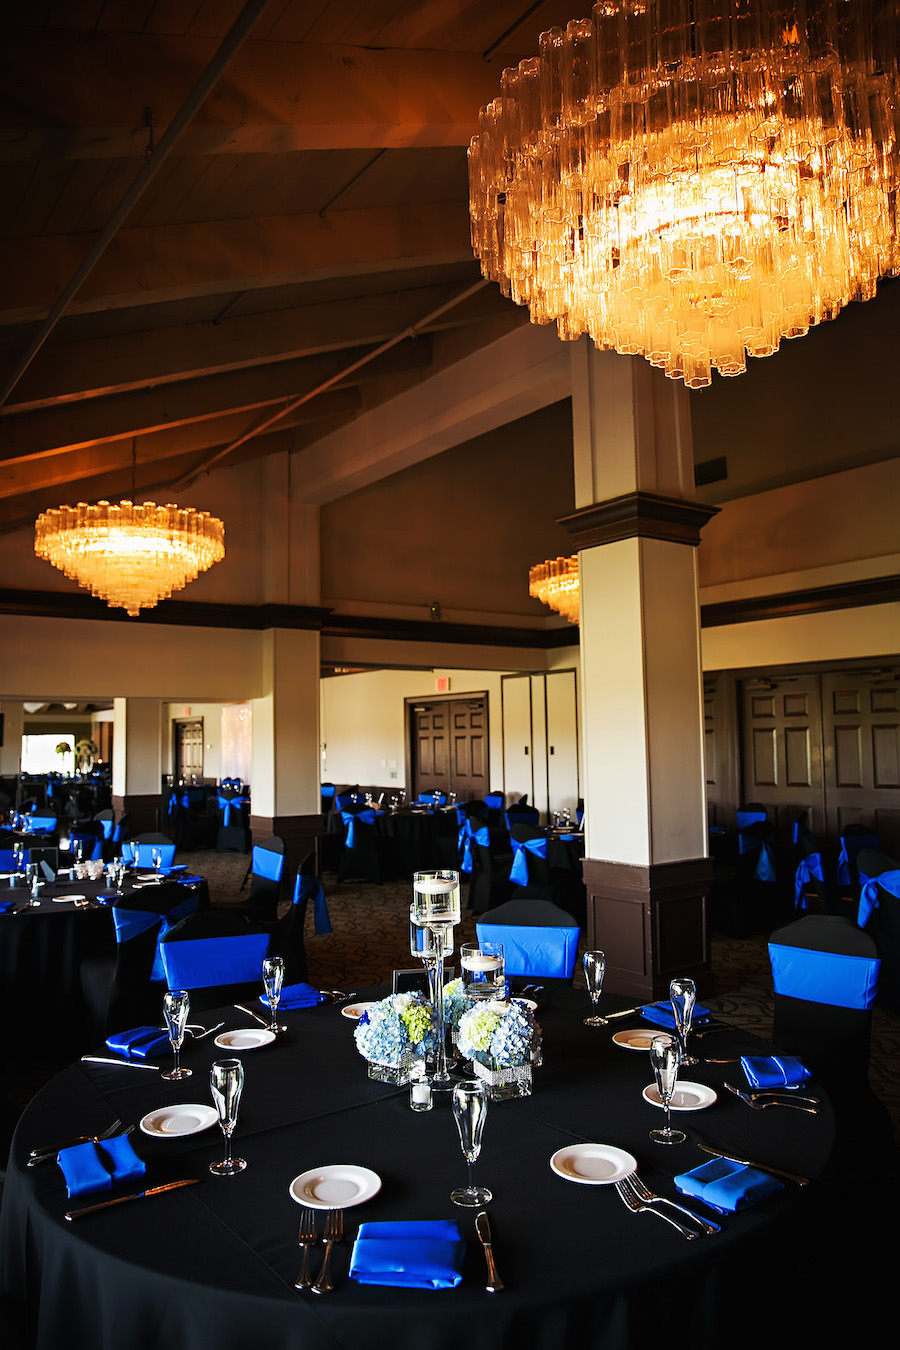 Traditional Wedding Reception Décor with Black Tablecloths, Royal Blue Chair Covers and Napkins with Blue and Ivory Hydrangea Centerpieces at Countryside Country Club Wedding Venue | Limelight Photography